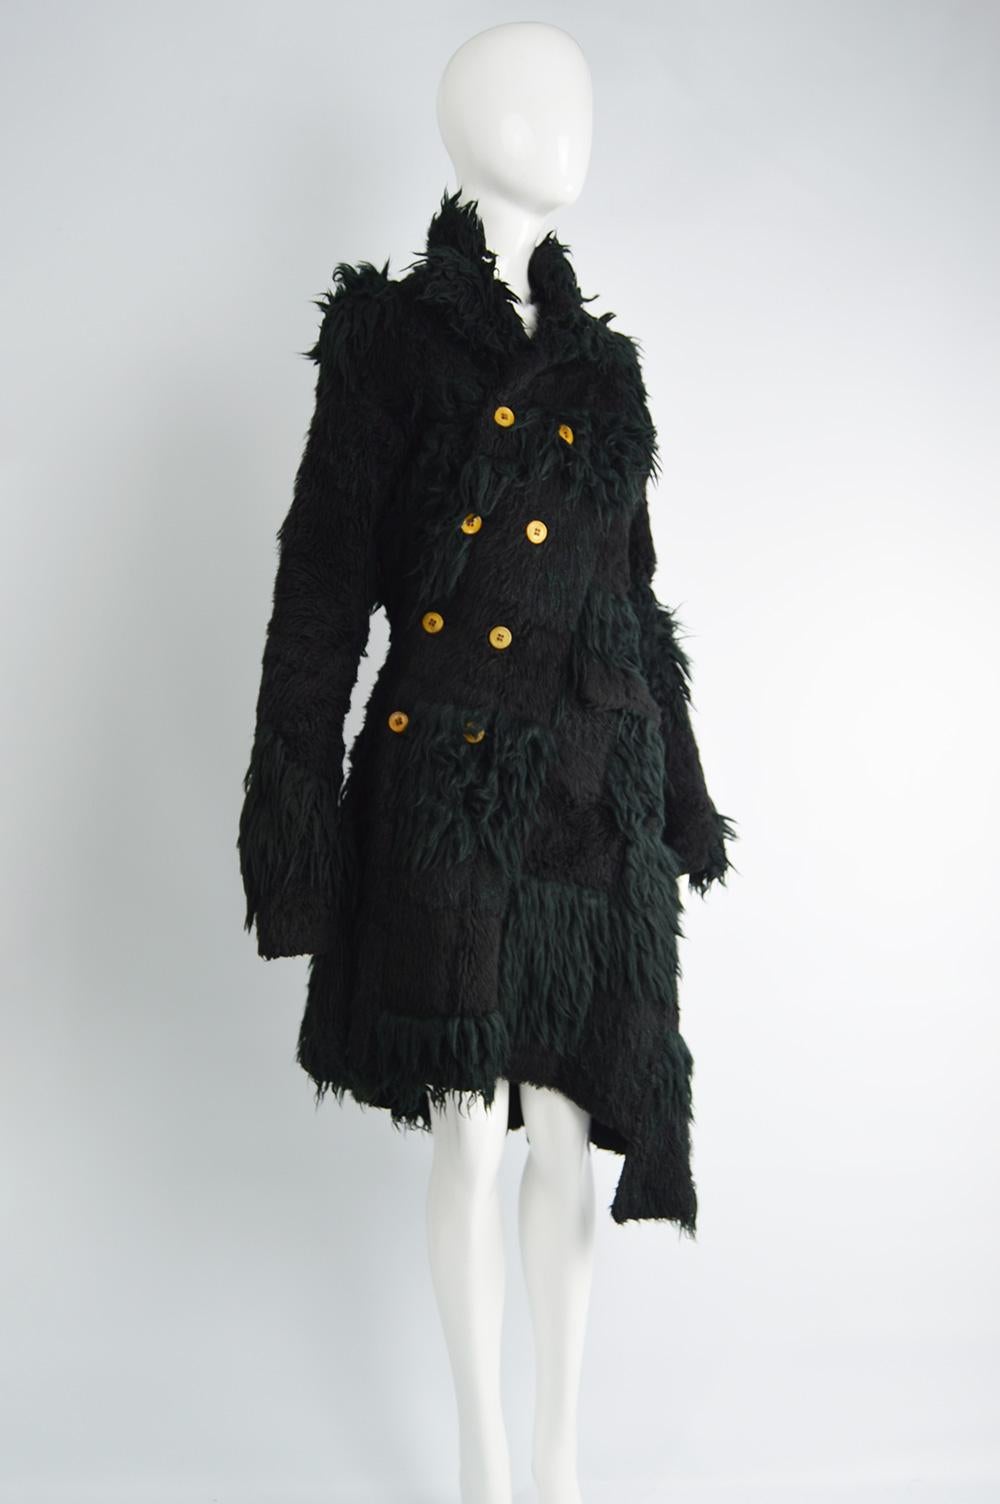 An incredible vintage women's Comme Des Garcons coat from the A/W 2002 collection. The twin of this jacket is in the Met Museums collection. In a patchwork of shaggy black faux fur fabrics with a twisted button fastening that gives a deconstructed